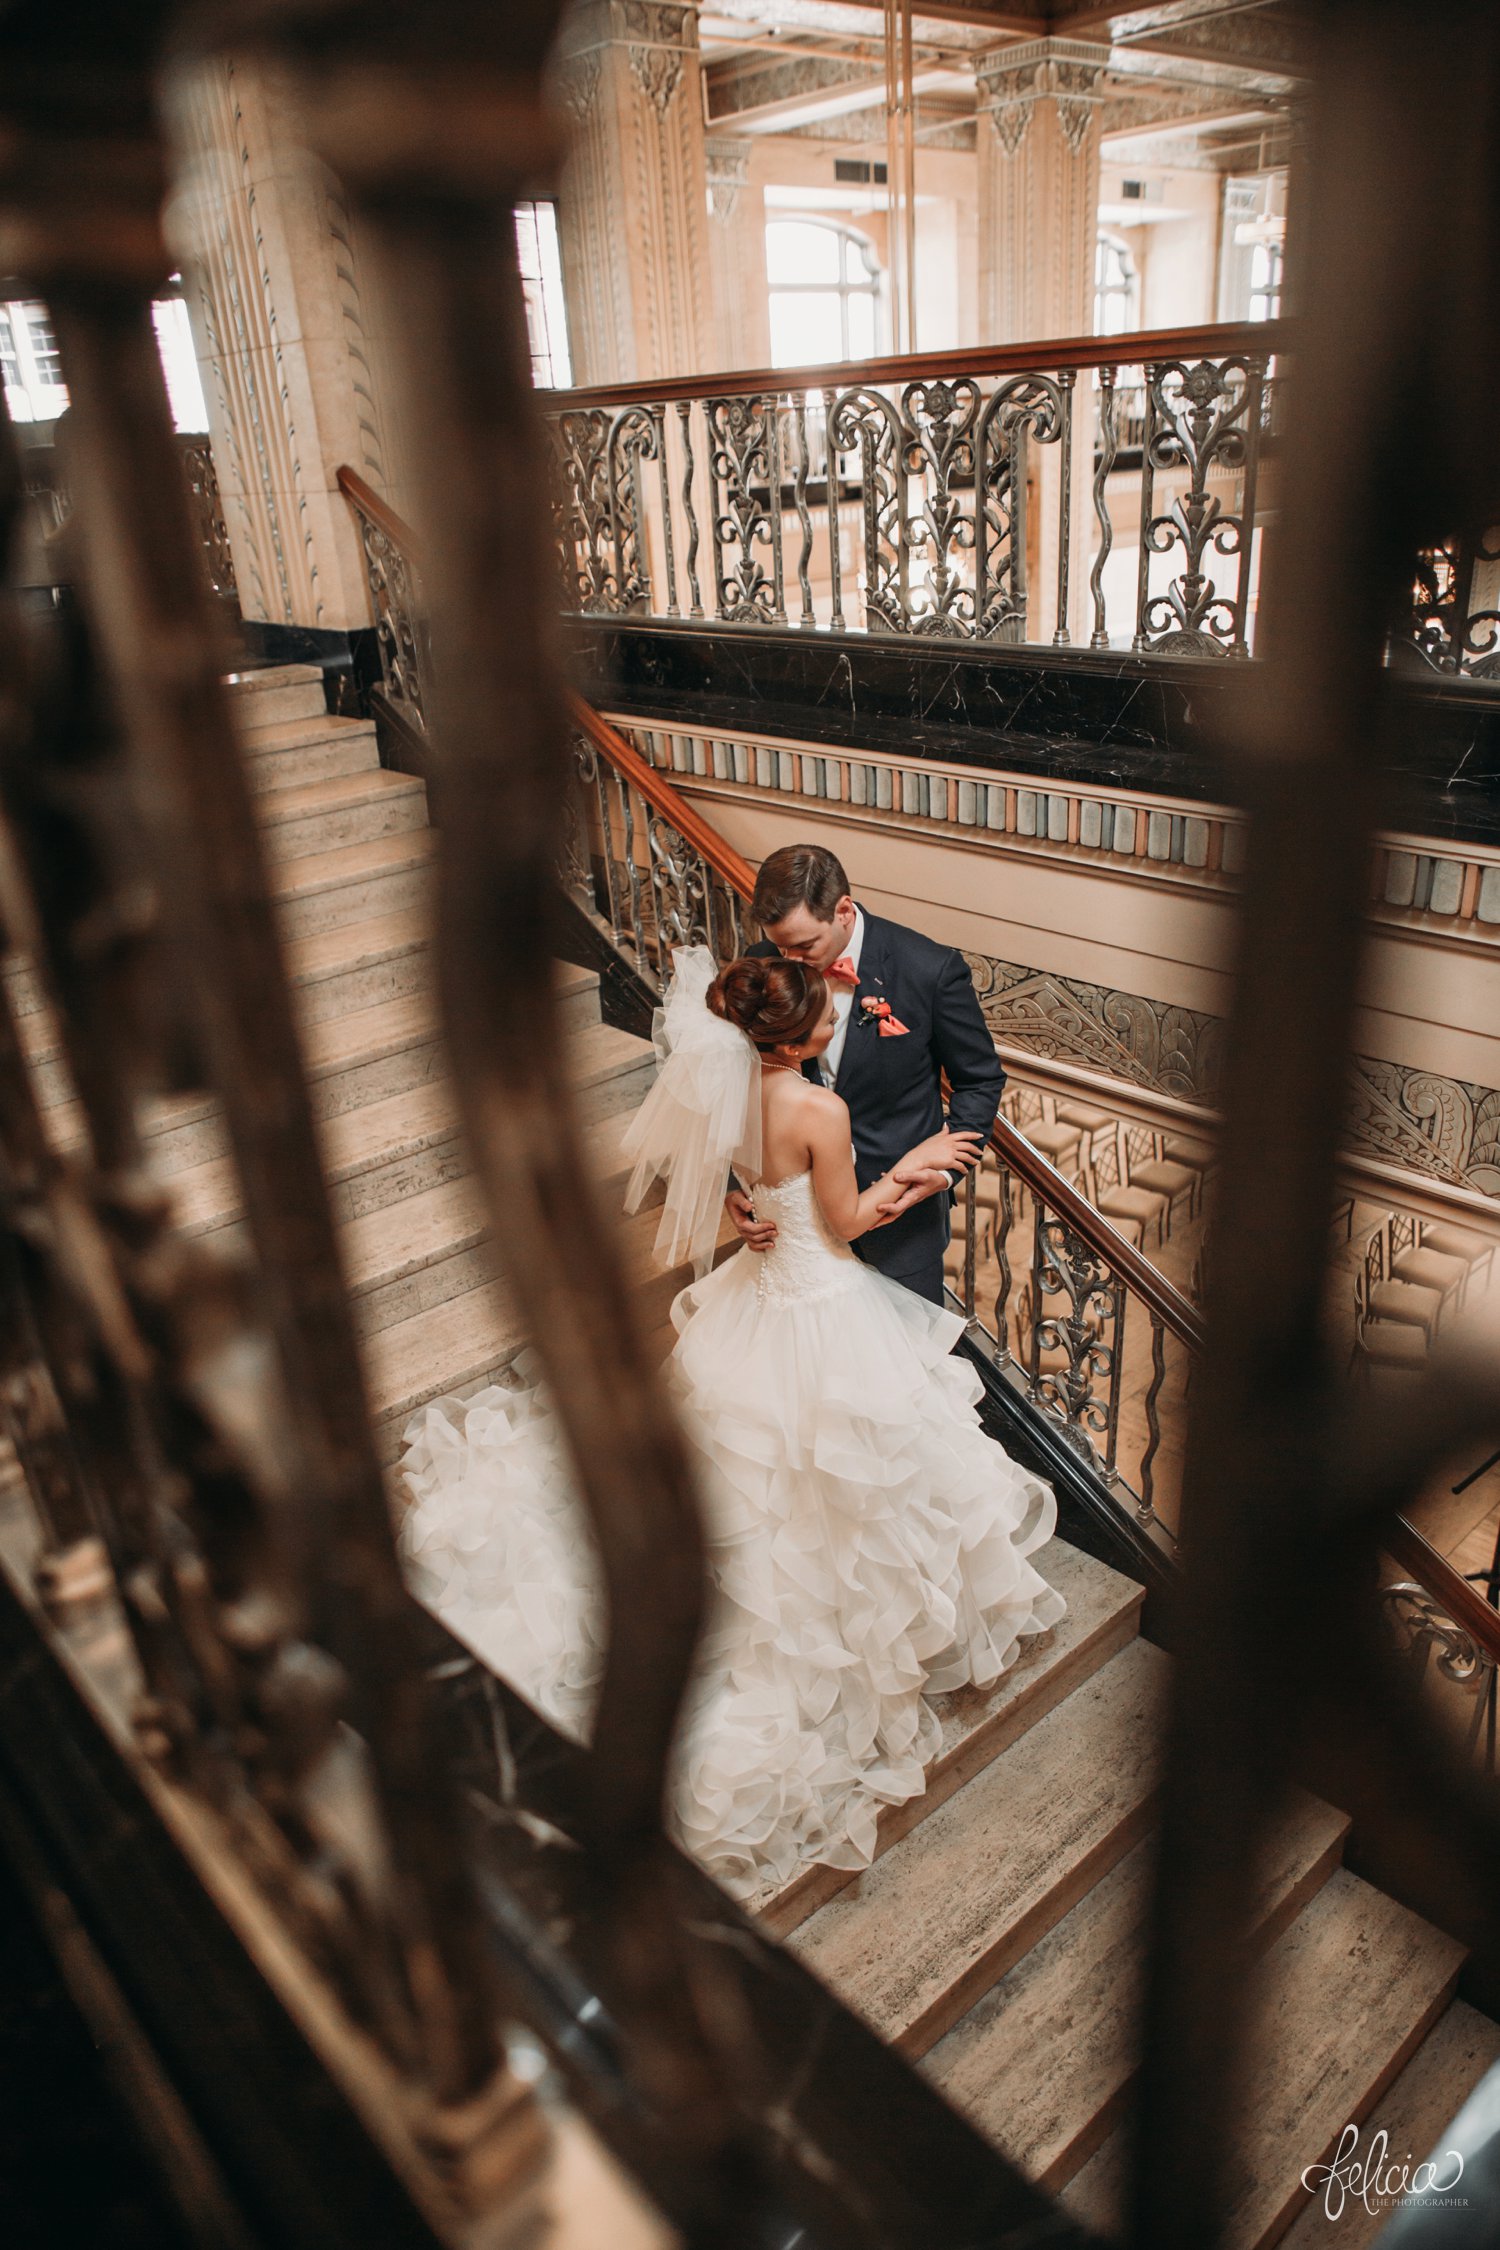 images by feliciathephotographer.com | destination wedding photographer | the grand hall at power and light | kansas city | missouri | downtown | glamorous | multicultural | details | first look | romantic | iron railings | peach bow tie | 